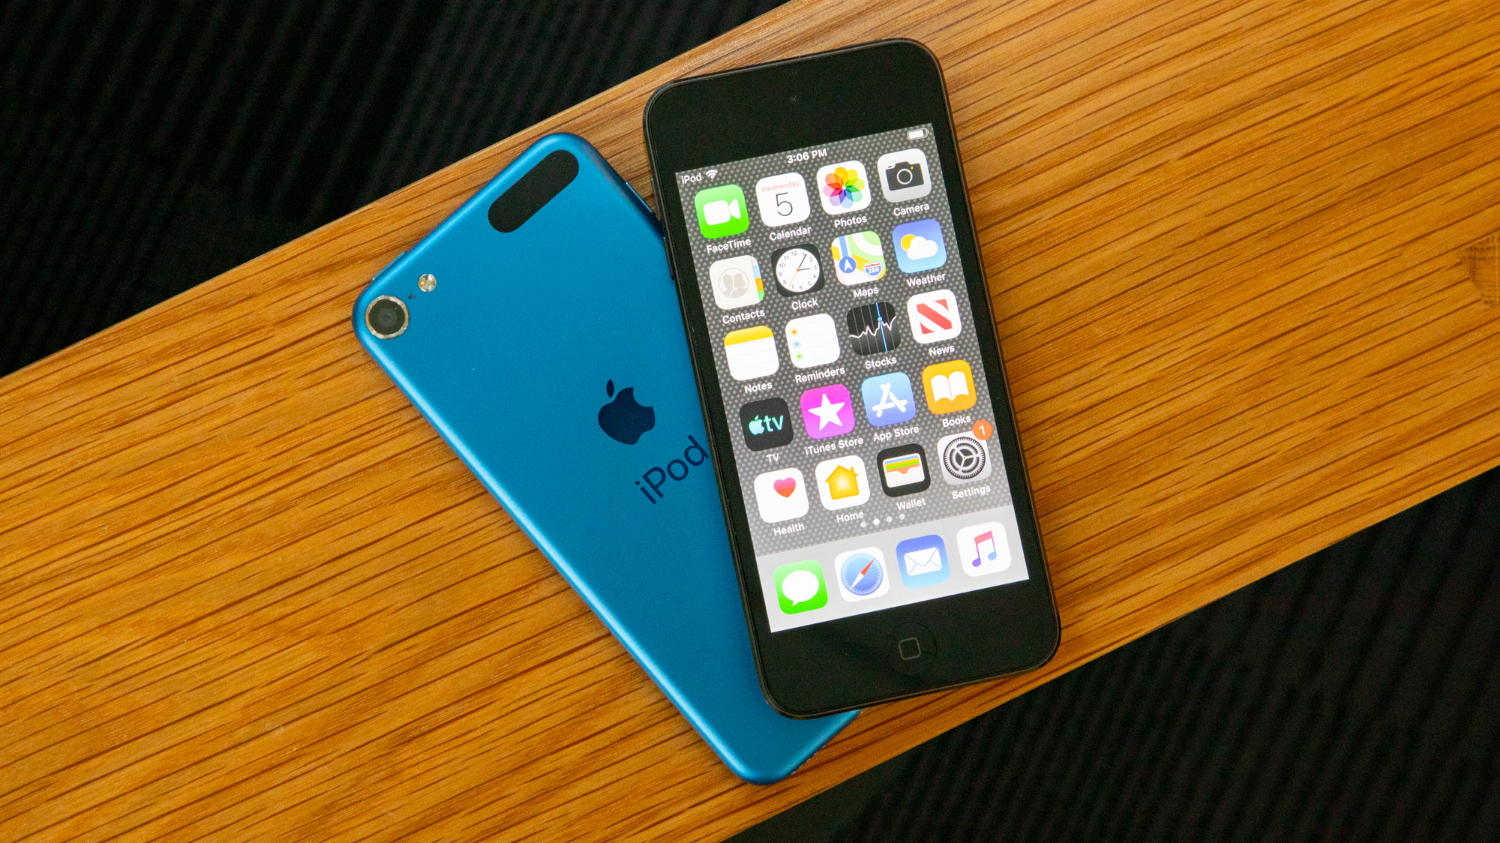 IPod touch review: Believe it or not, using it is a lot of fun